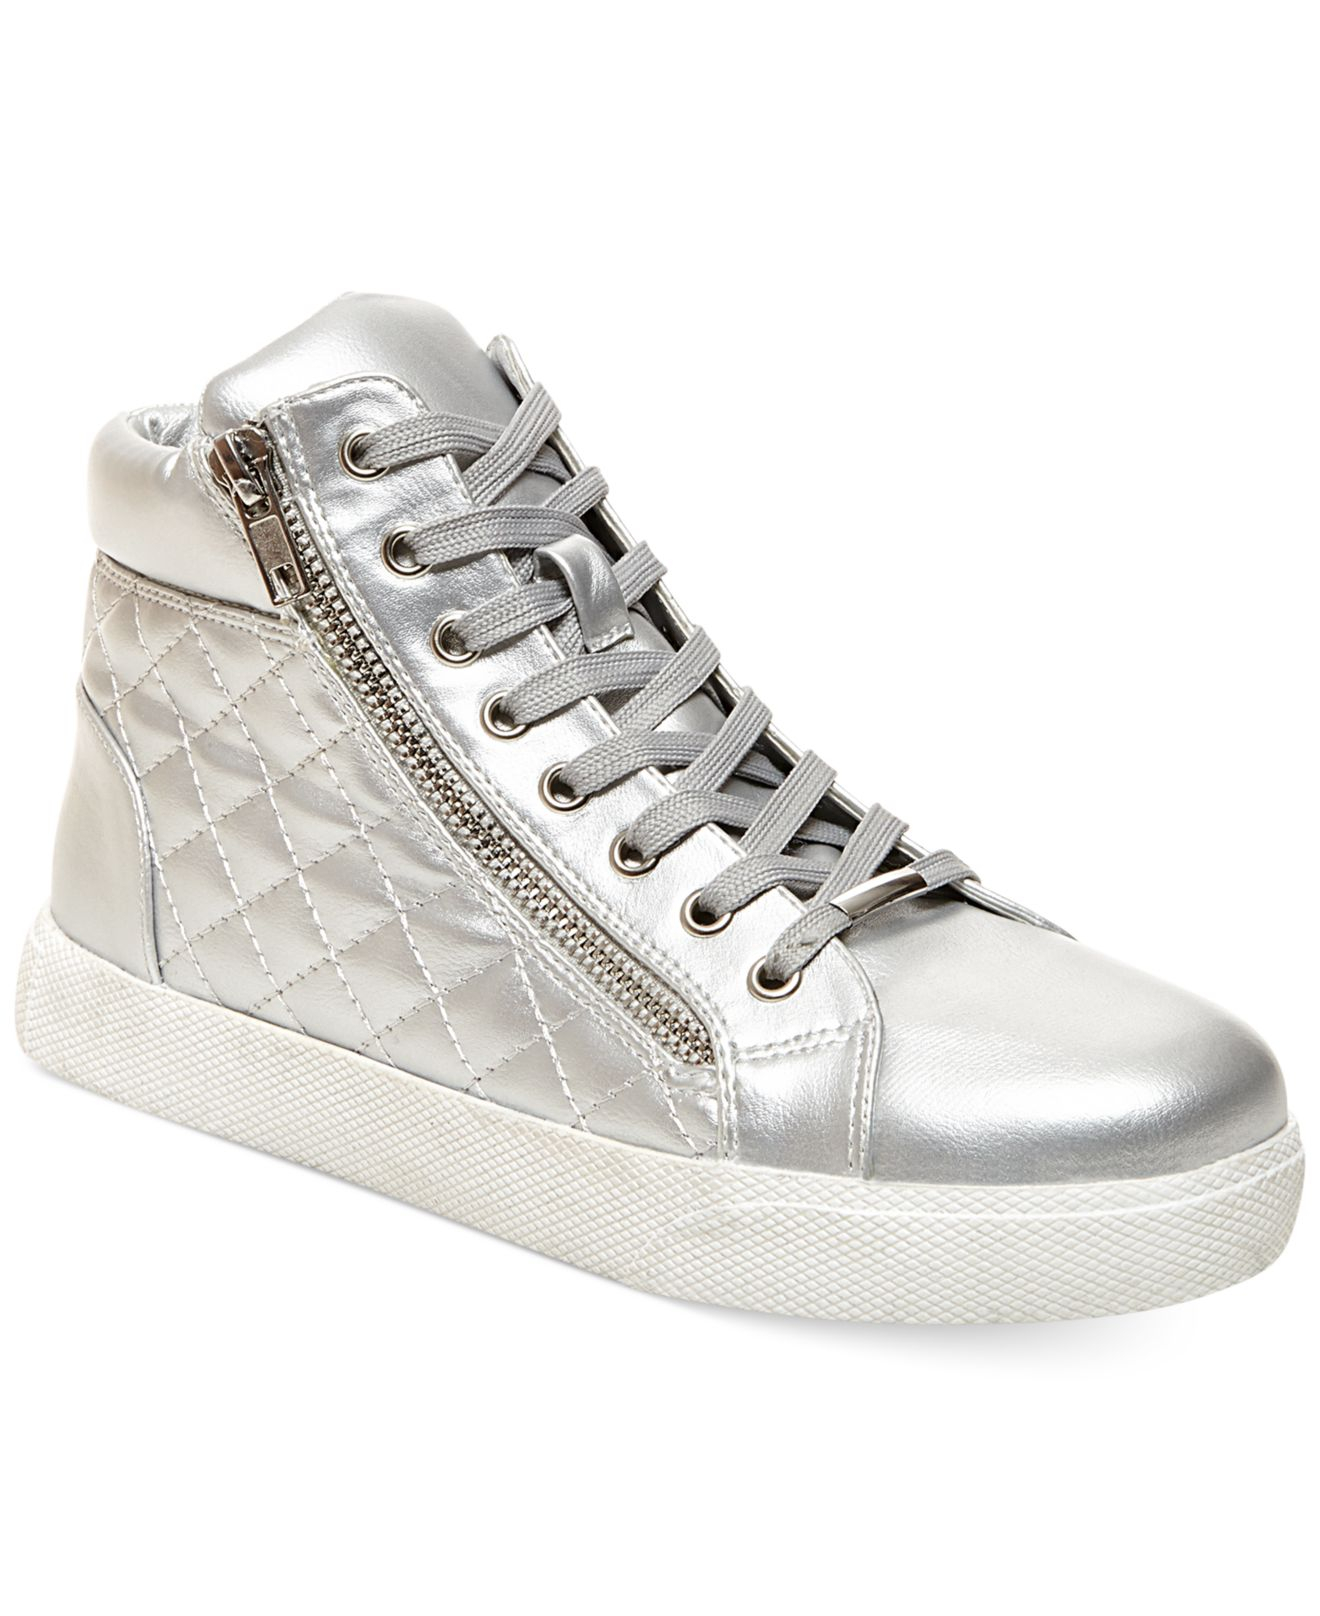 Steve Madden Decaf Hightop Quilted Platform Sneakers in Silver | Lyst